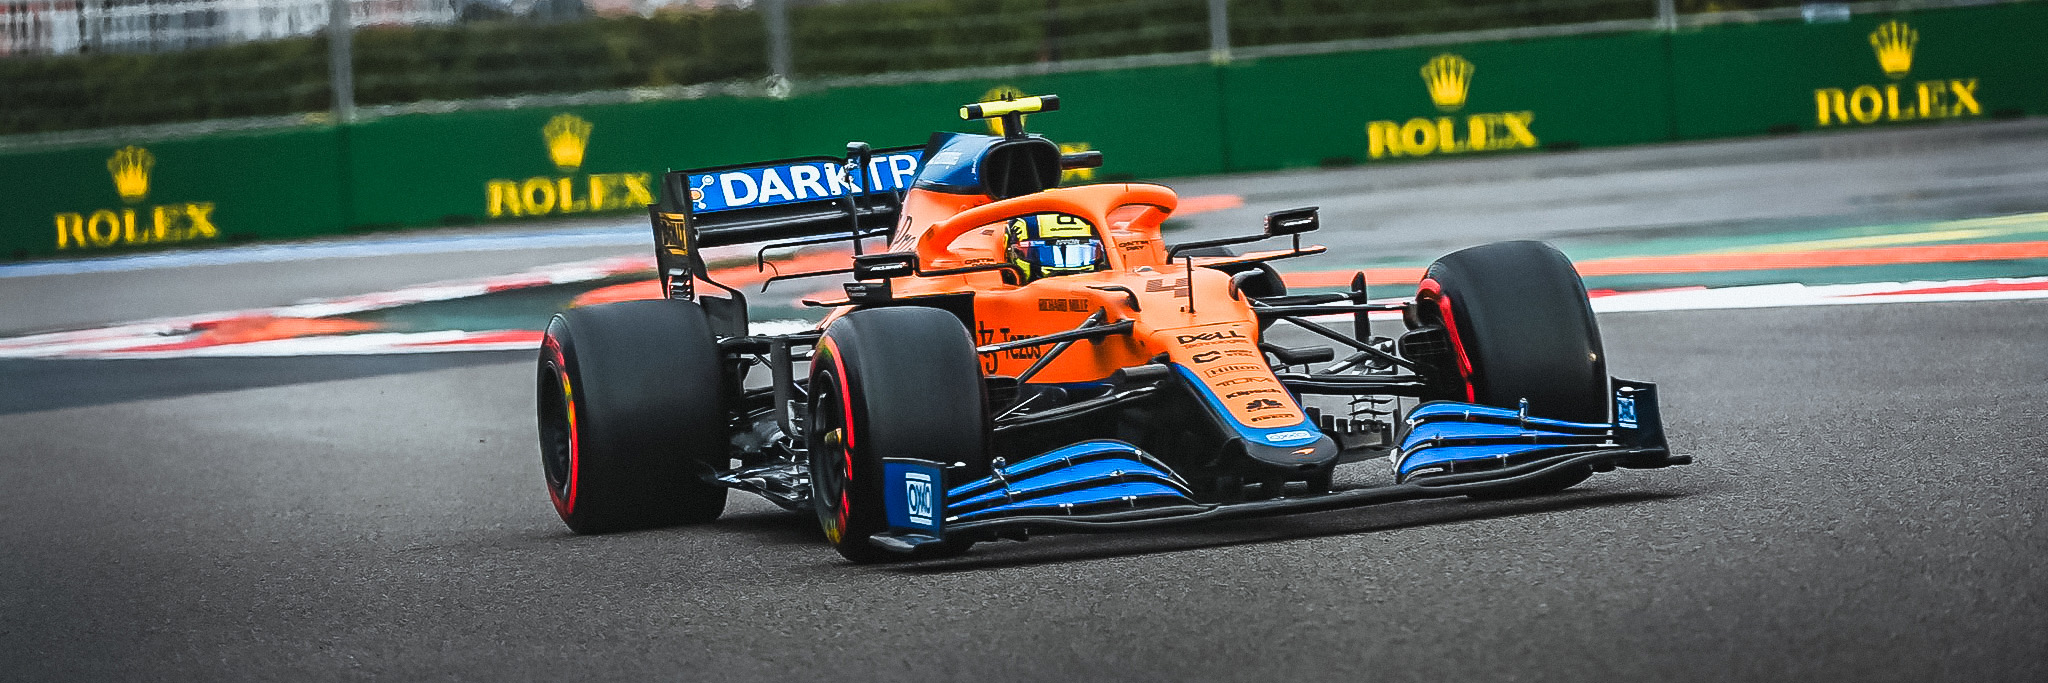 Lando Norris on track at the 2021 Russian Grand Prix